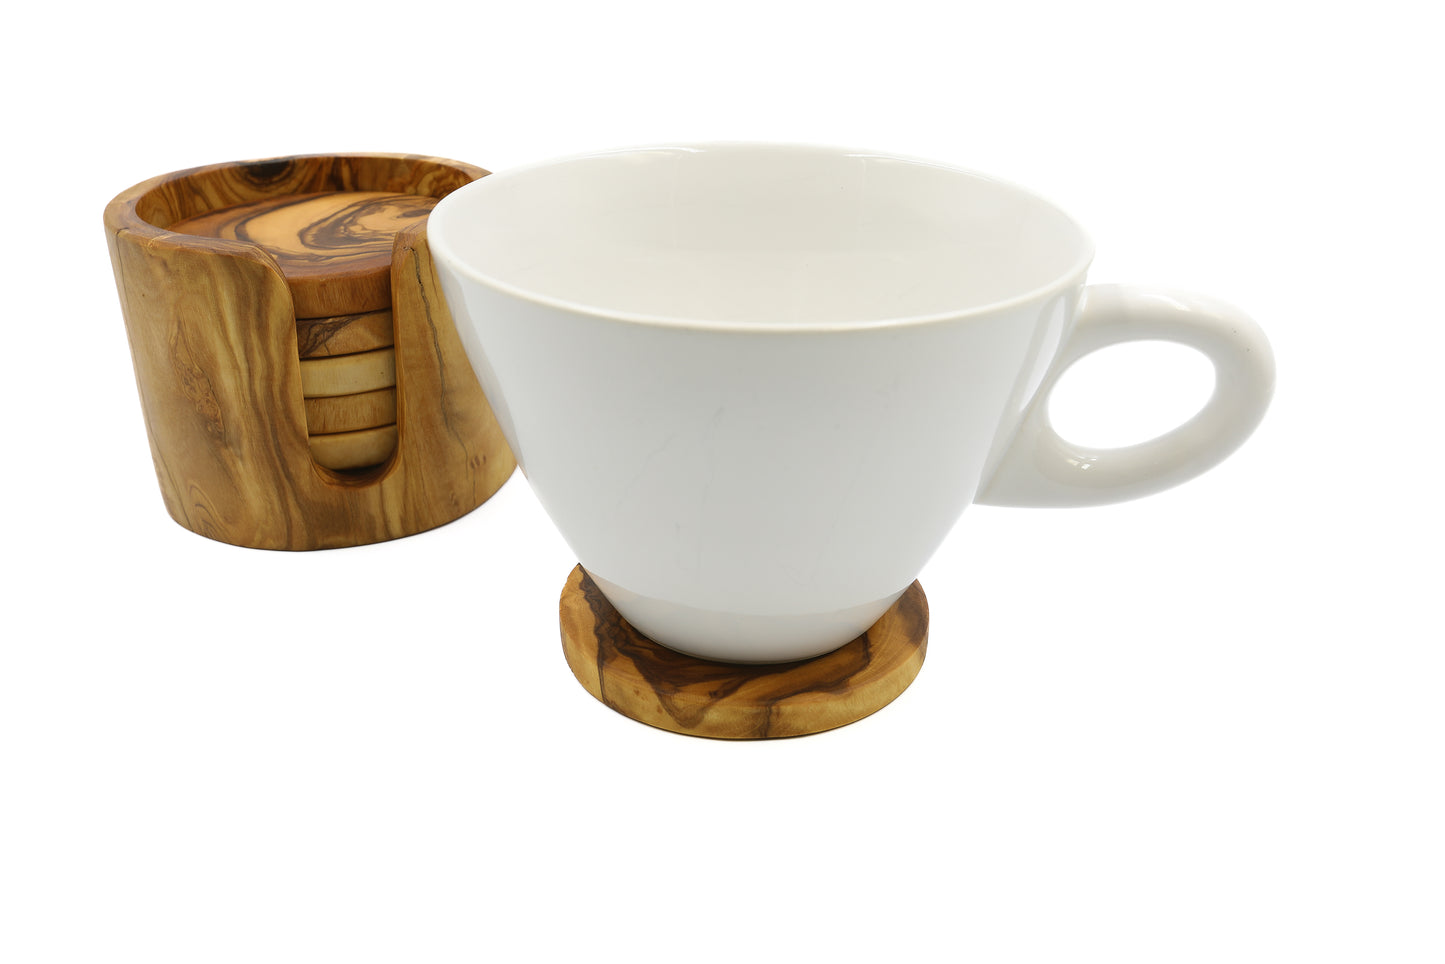 Artisanal Olive Wood Tableware: Rustic Coasters and Wooden Trivets